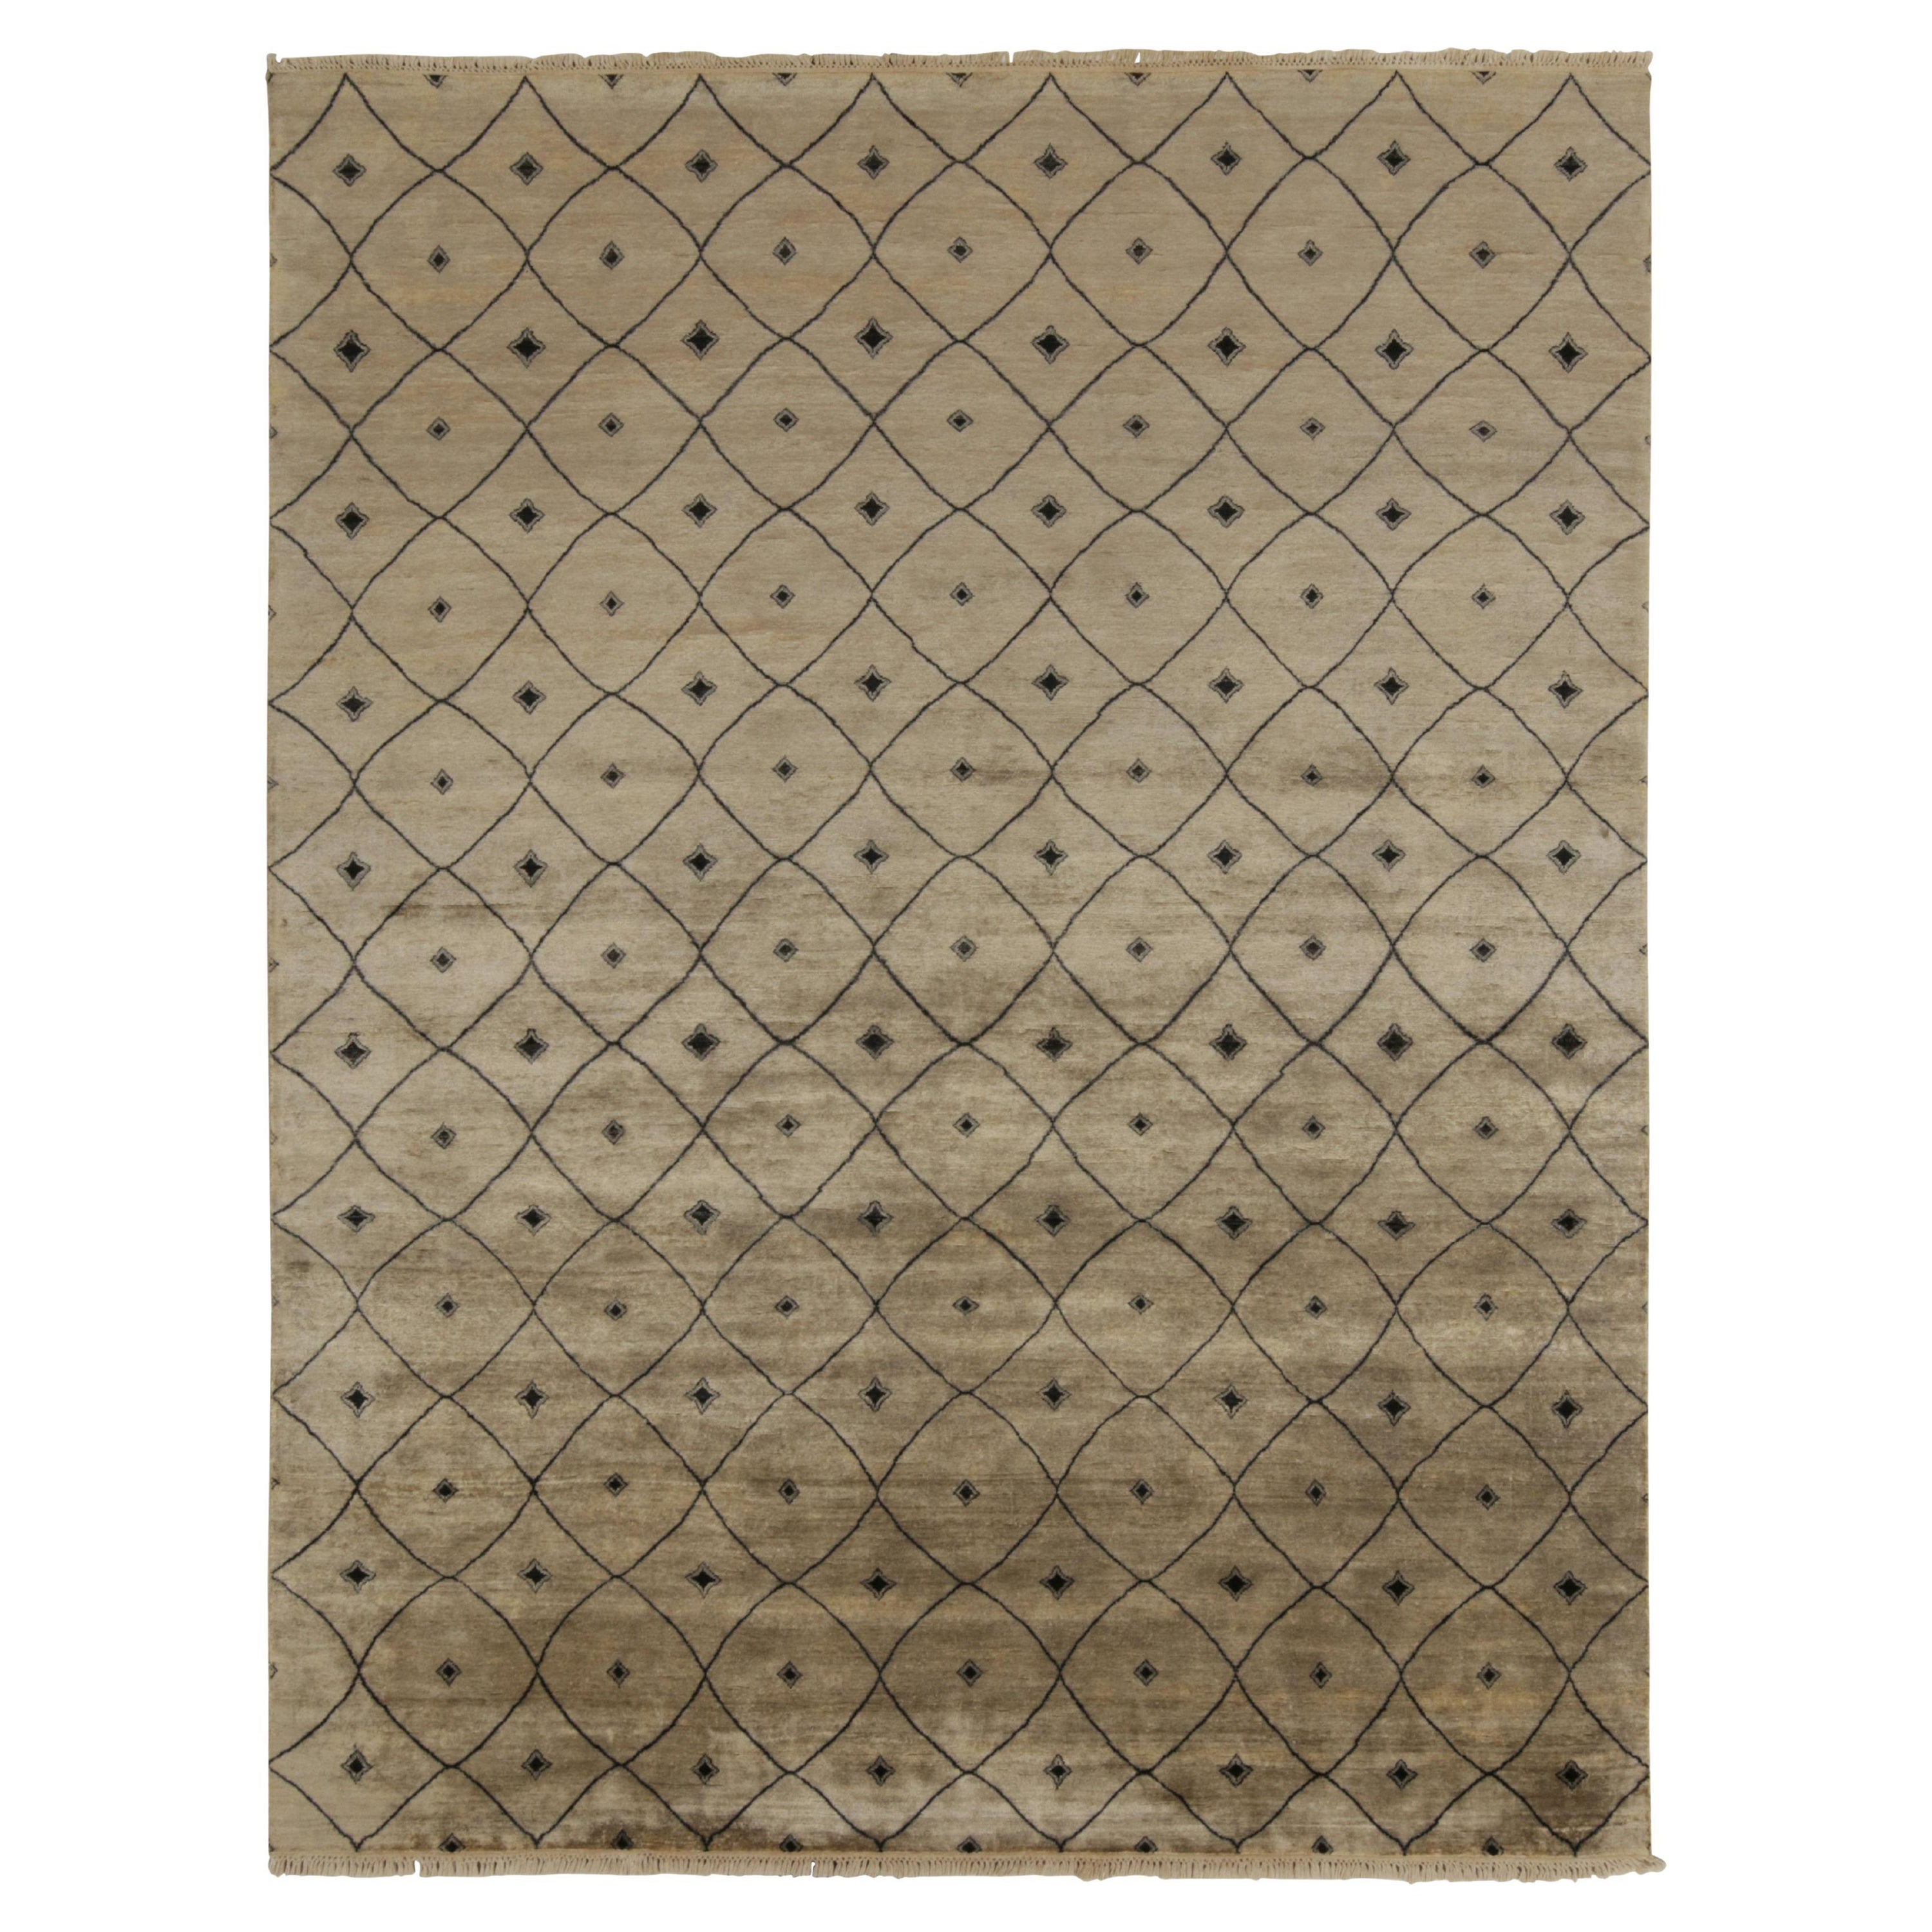 Rug & Kilim’s Moroccan style rug in Beige-Brown with Black Trellis Pattern For Sale